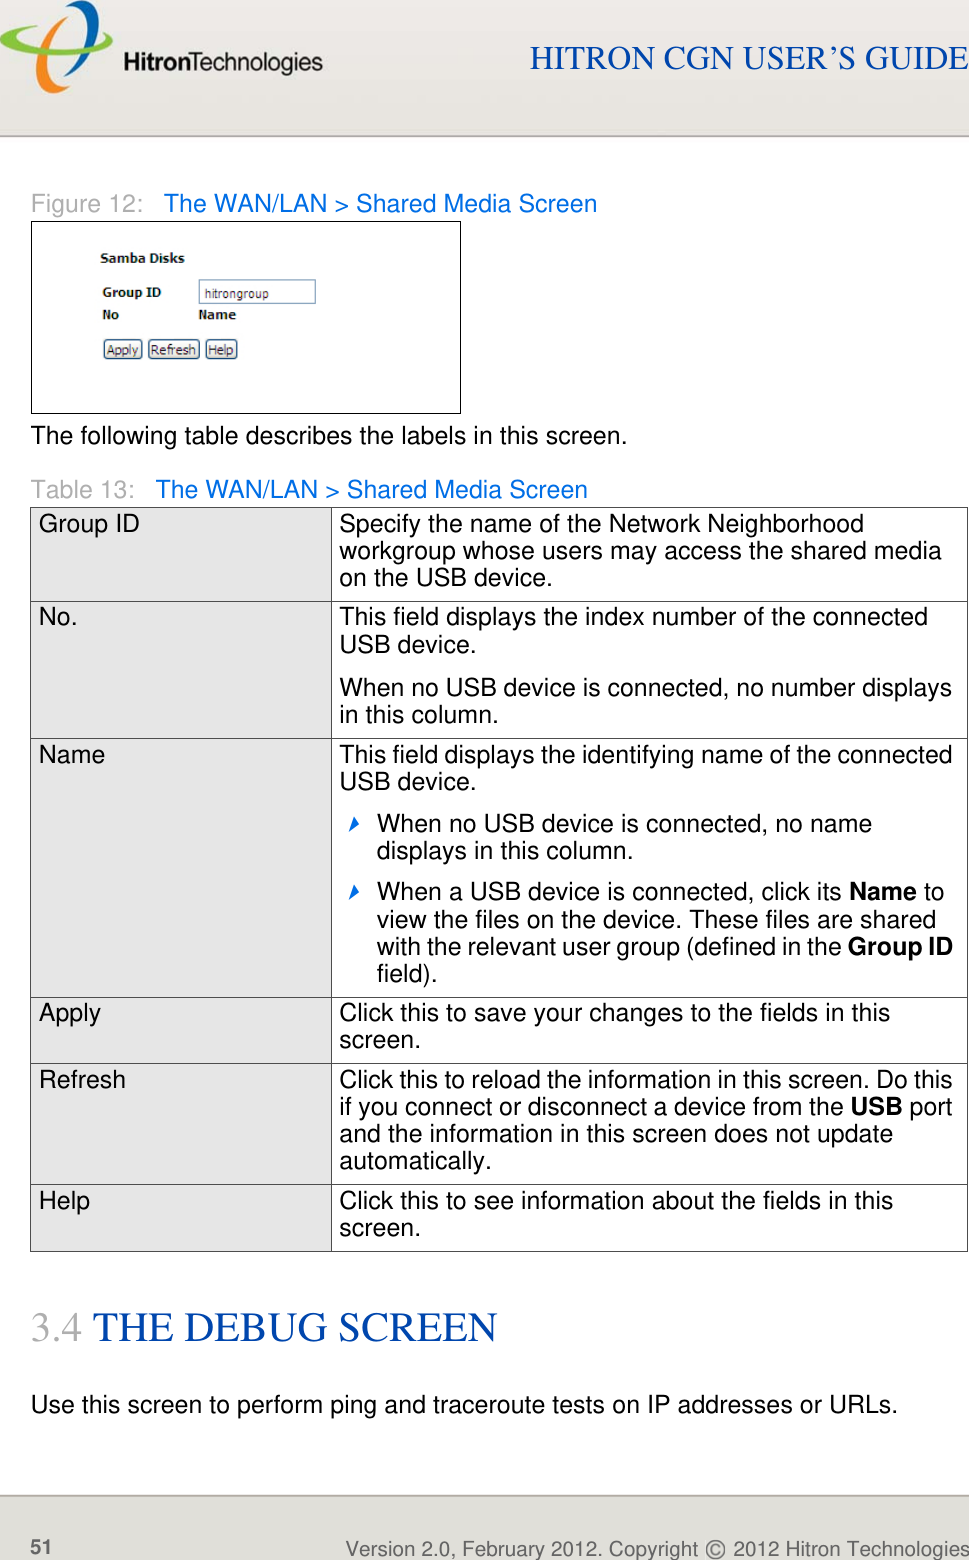 WAN/LANVersion 2.0, February 2012. Copyright   2012 Hitron Technologies51Version 2.0, February 2012. Copyright   2012 Hitron Technologies51HITRON CGN USER’S GUIDEFigure 12:   The WAN/LAN &gt; Shared Media ScreenThe following table describes the labels in this screen.3.4 THE DEBUG SCREENUse this screen to perform ping and traceroute tests on IP addresses or URLs.Table 13:   The WAN/LAN &gt; Shared Media ScreenGroup ID Specify the name of the Network Neighborhood workgroup whose users may access the shared media on the USB device.No. This field displays the index number of the connected USB device.When no USB device is connected, no number displays in this column.Name This field displays the identifying name of the connected USB device.When no USB device is connected, no name displays in this column.When a USB device is connected, click its Name to view the files on the device. These files are shared with the relevant user group (defined in the Group ID field).Apply Click this to save your changes to the fields in this screen.Refresh Click this to reload the information in this screen. Do this if you connect or disconnect a device from the USB port and the information in this screen does not update automatically.Help Click this to see information about the fields in this screen.